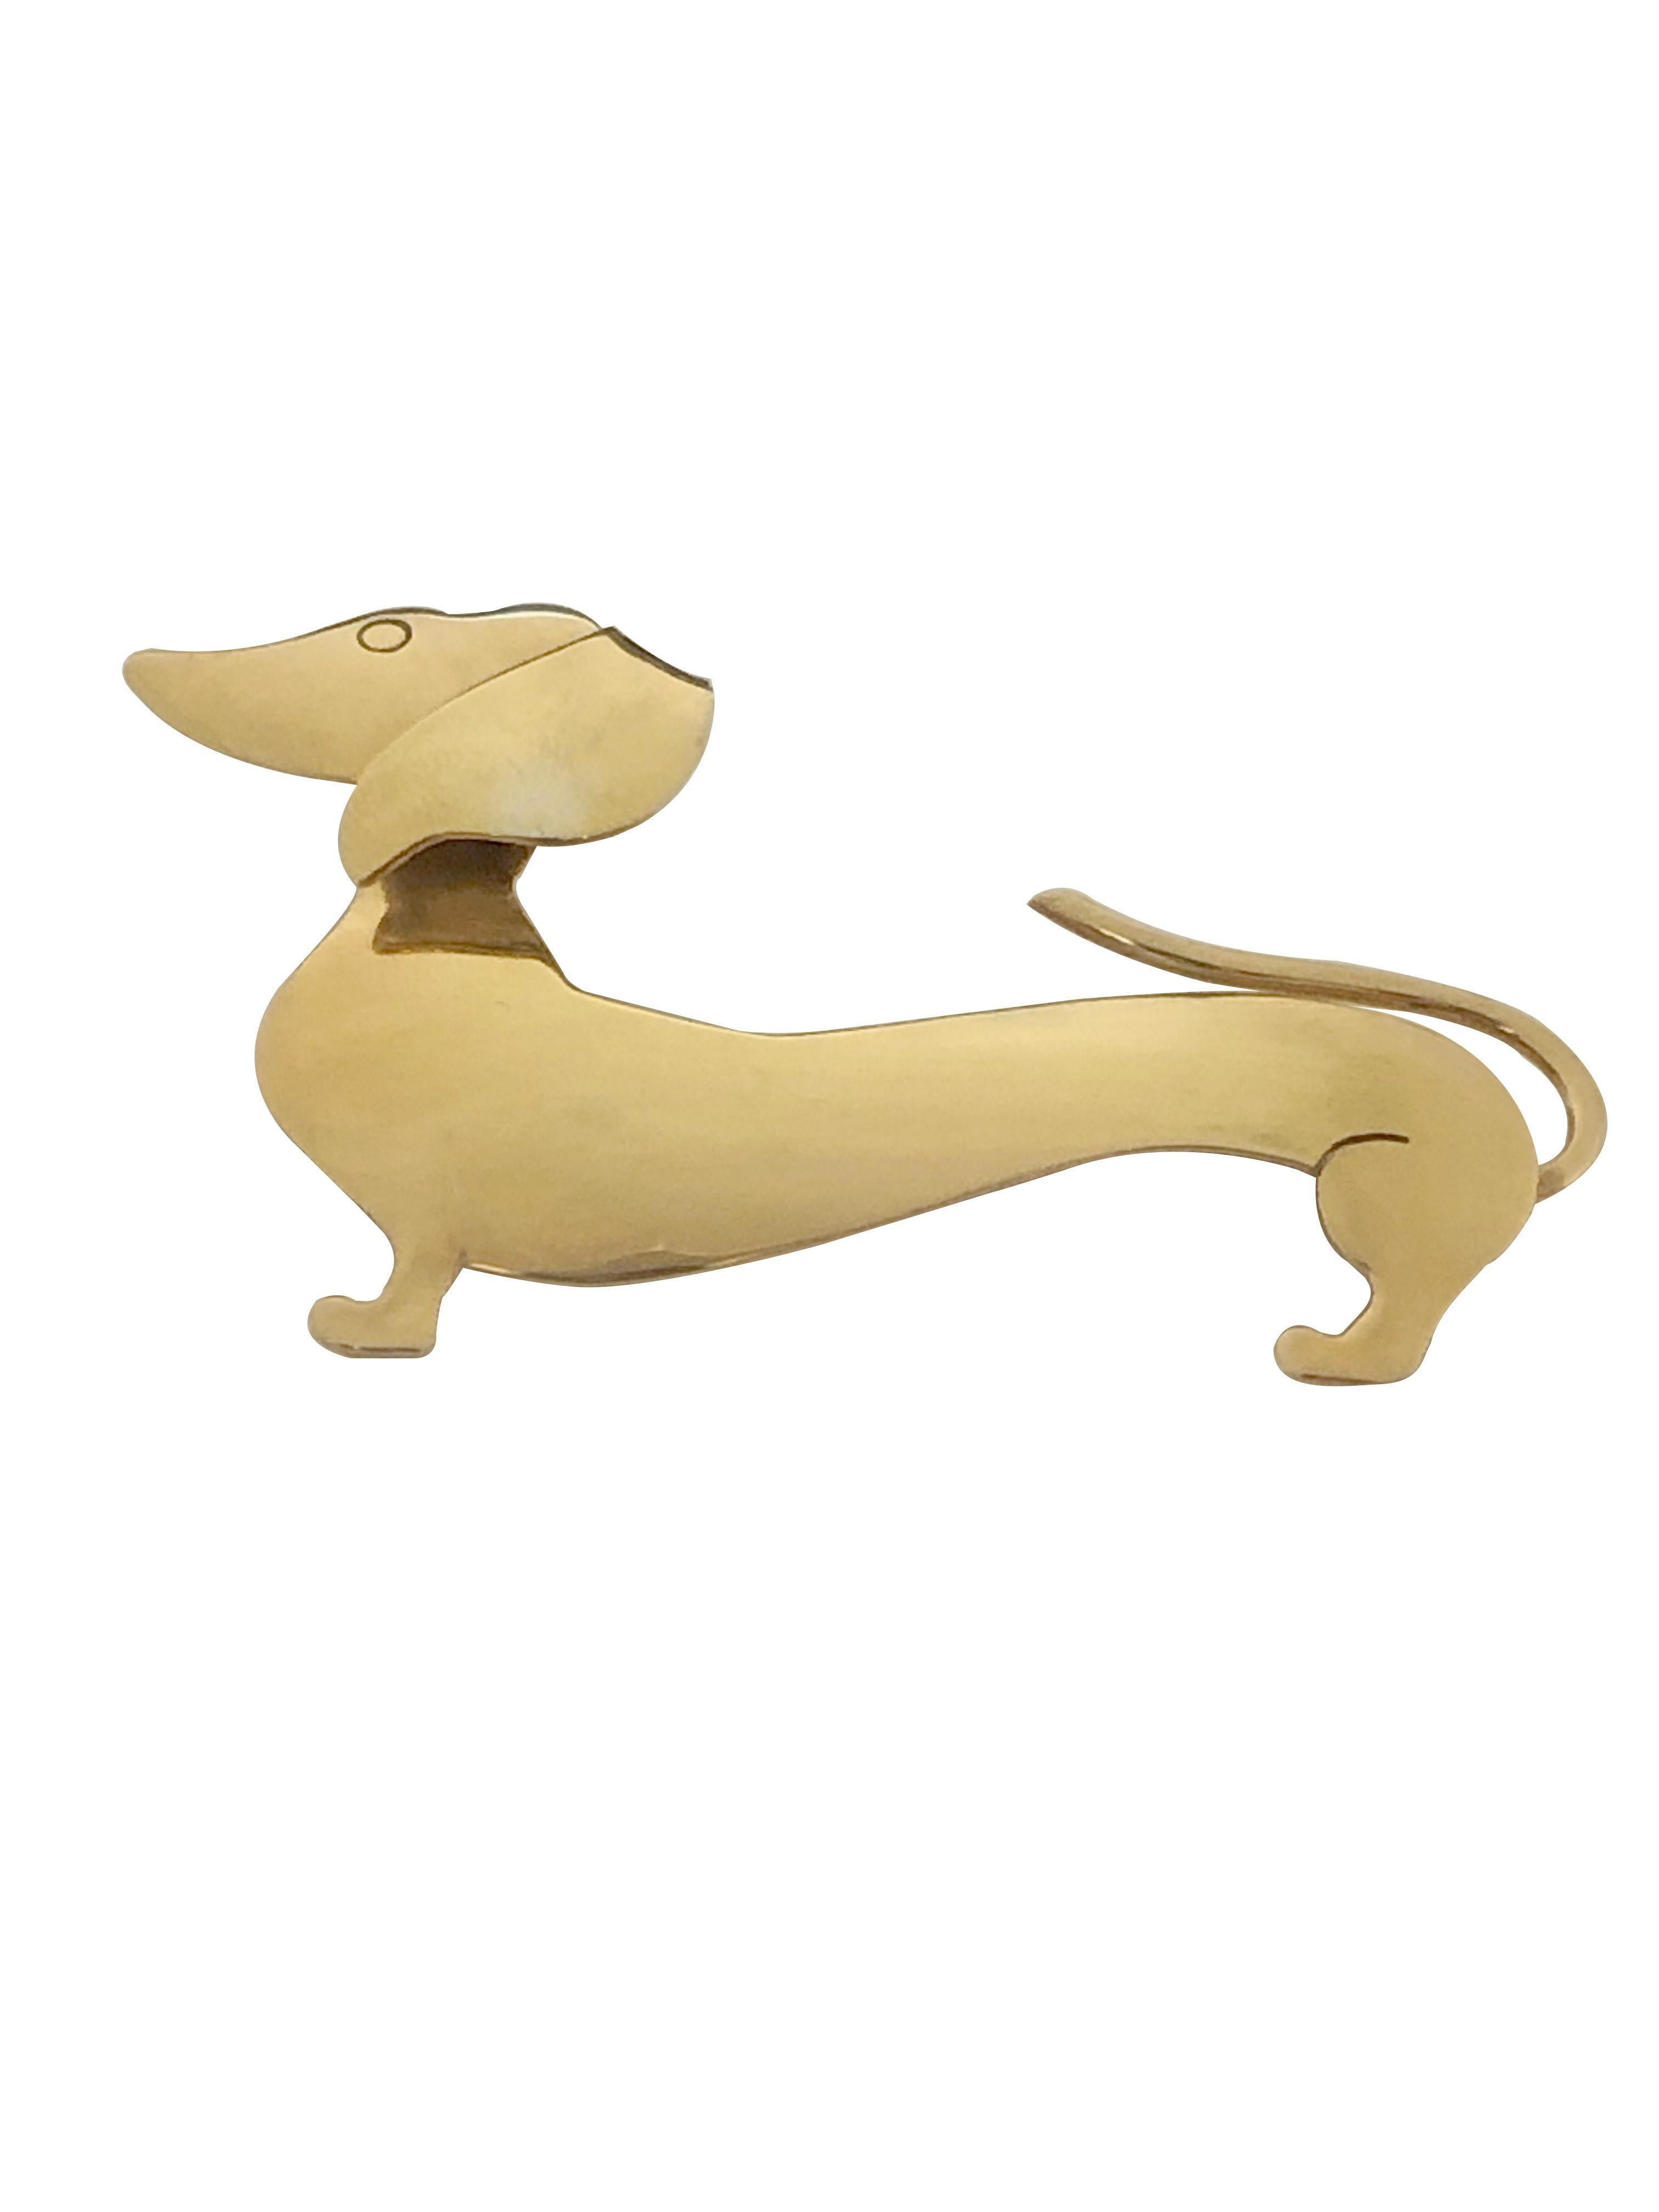 Circa 1960 Gold Wash Sterling Silver Dachshund Dog pin by ORB, measuring 2 1/8 inches in length X 1 1/2 inches. a Well made Whimsical Piece. 